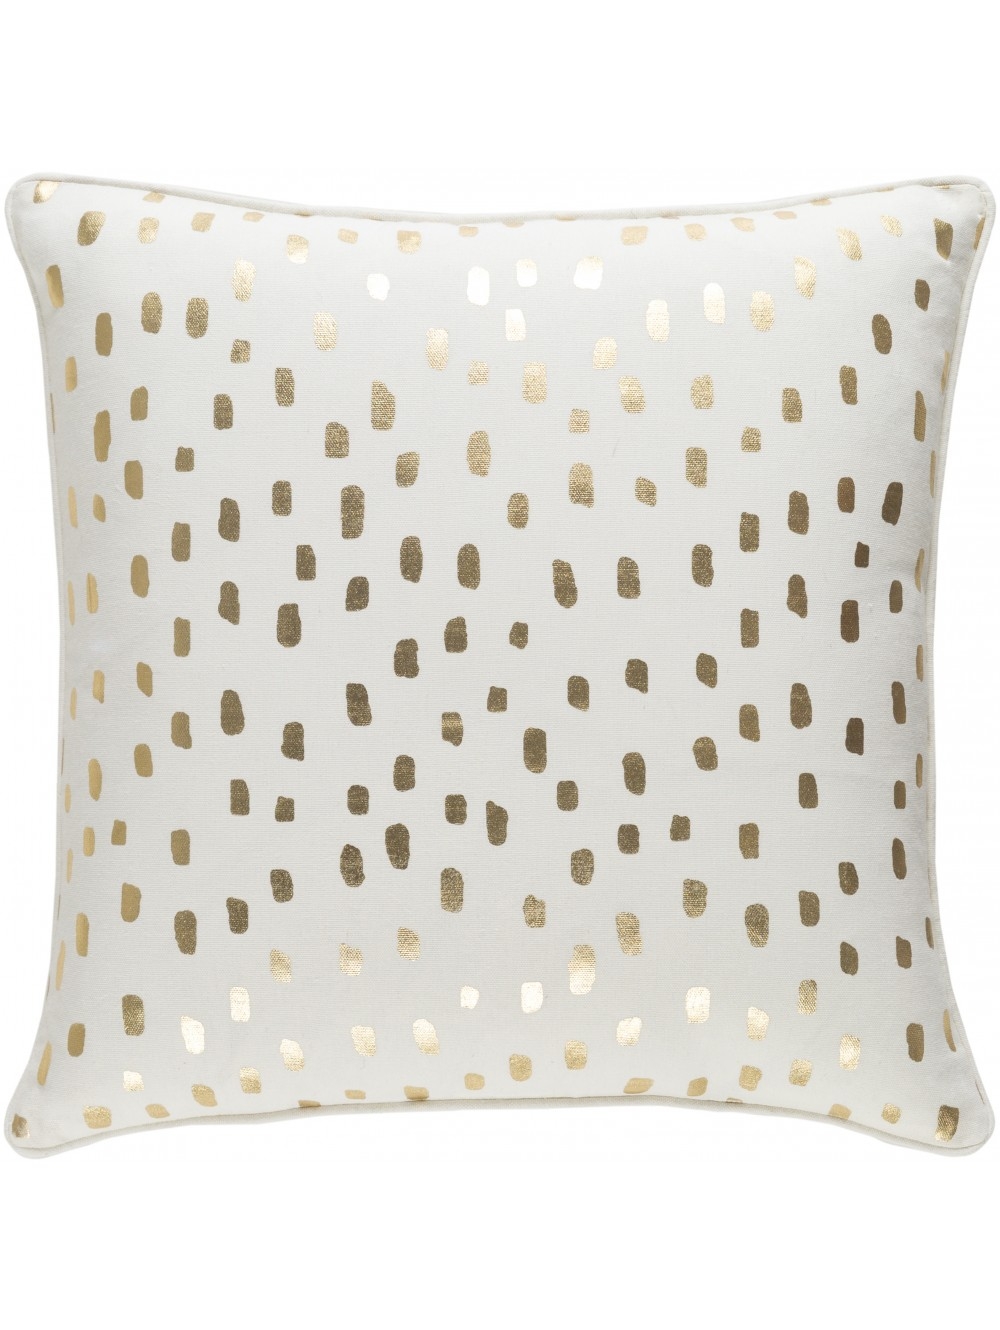 Dalmatian Pillow, Gold - 18" x 18" - polyester Filled - Image 0